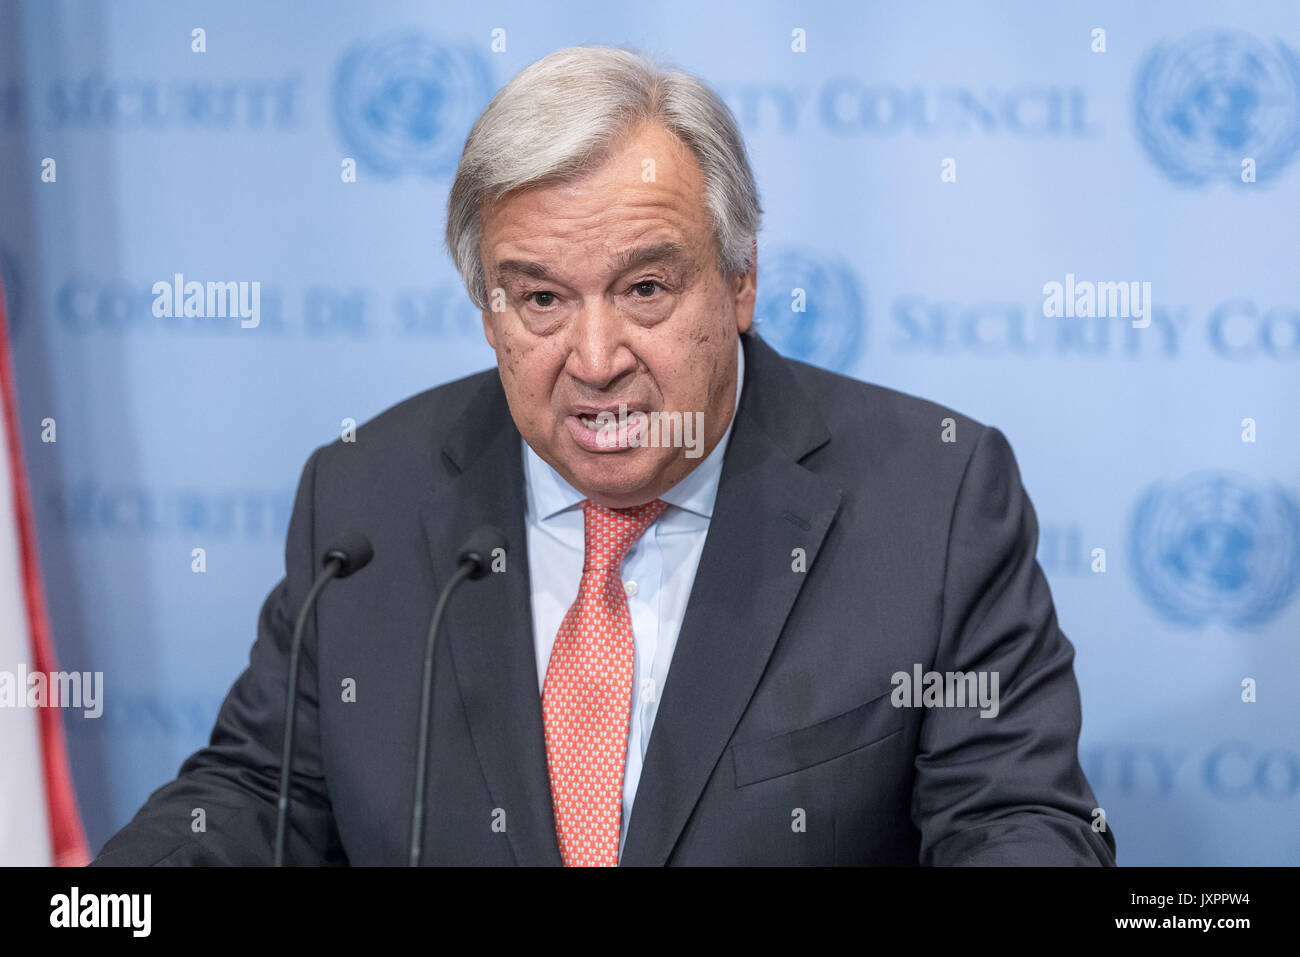 New York, United States. 16th Aug, 2017. United Nations Secretary-General Antonio Guterres spoke to the press at the Security Council stakeout at UN Headquarters delivering a brief prepared statement regarding the ongoing security issues posed by North Korea's nuclear weapons program. Following his prepared remarks, the Secretary-General responded to questions regarding the political crisis in Venezuela and U.S. President Donald Trump's stance regarding the rise of white nationalism. Credit: Albin Lohr-Jones/Pacific Press/Alamy Live News Stock Photo